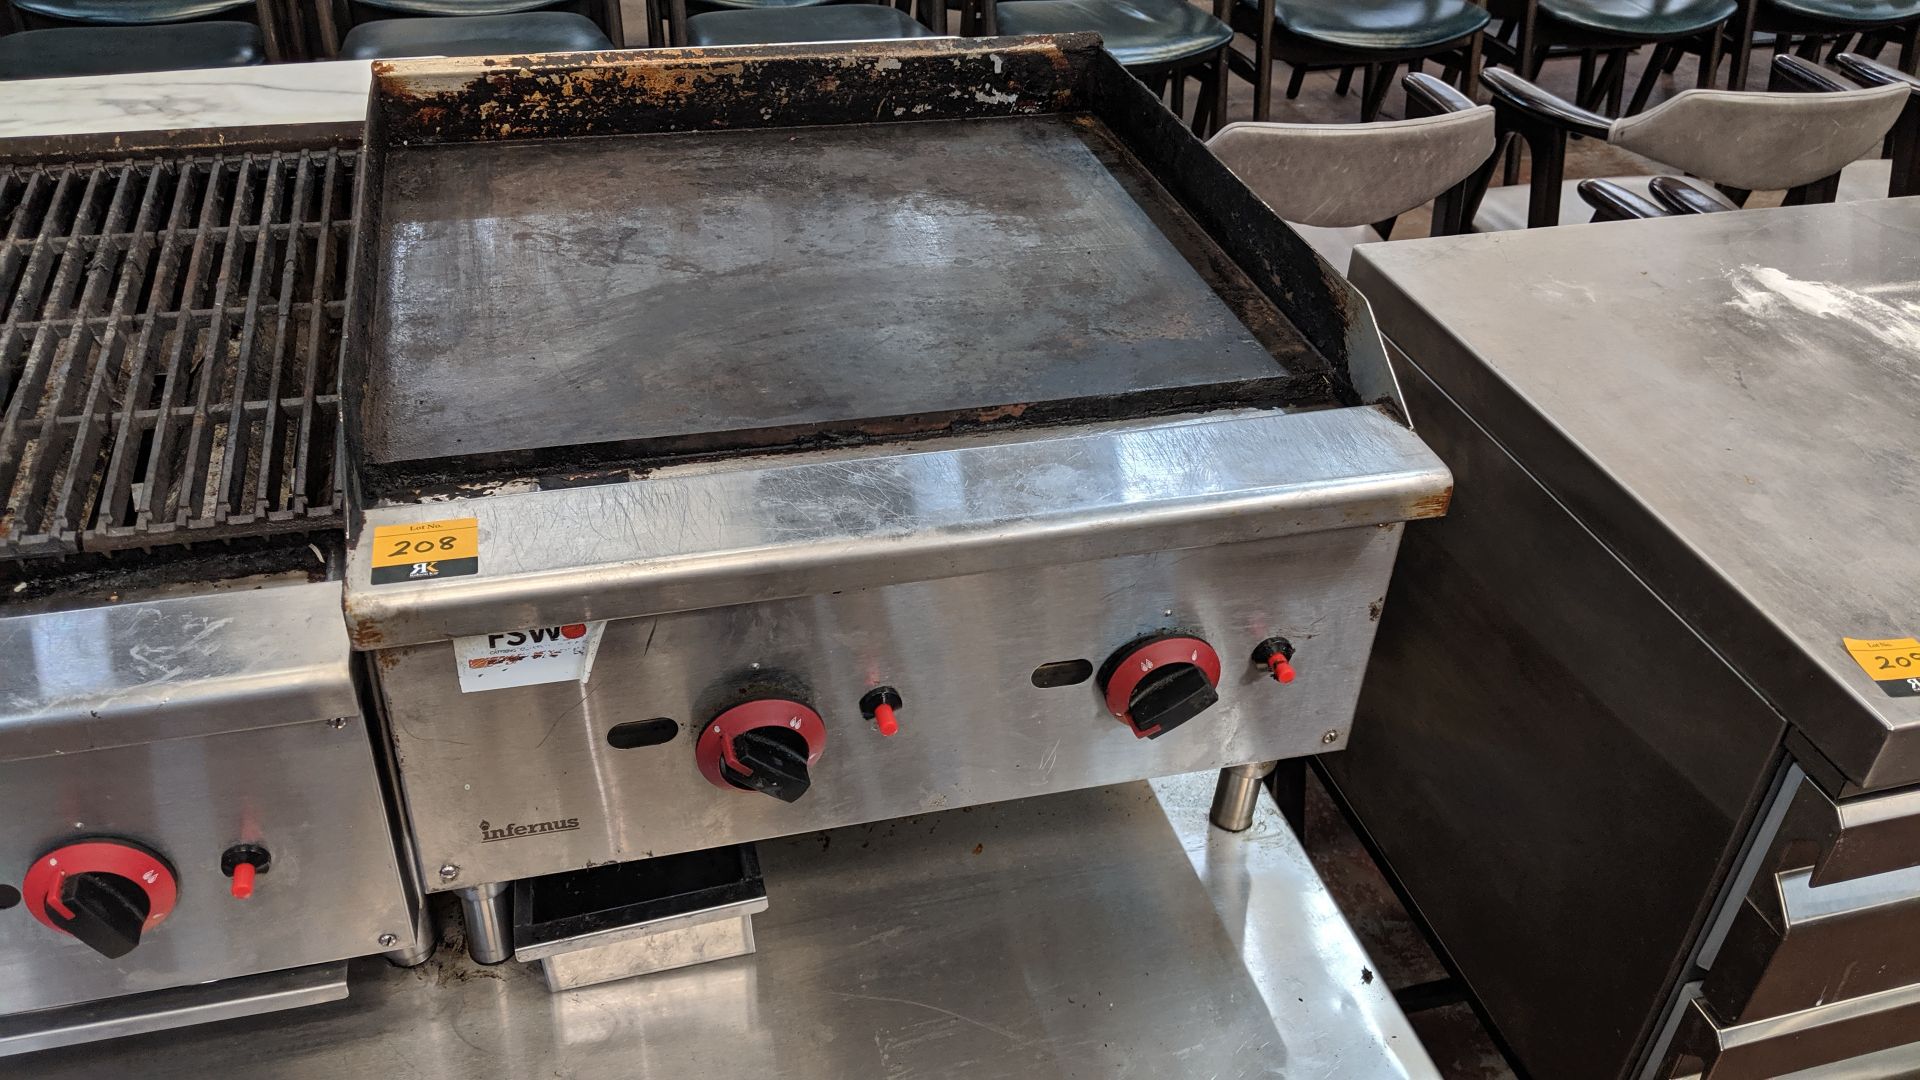 Infernus stainless steel plancha/griddle unit IMPORTANT: Please remember goods successfully bid upon - Image 2 of 4